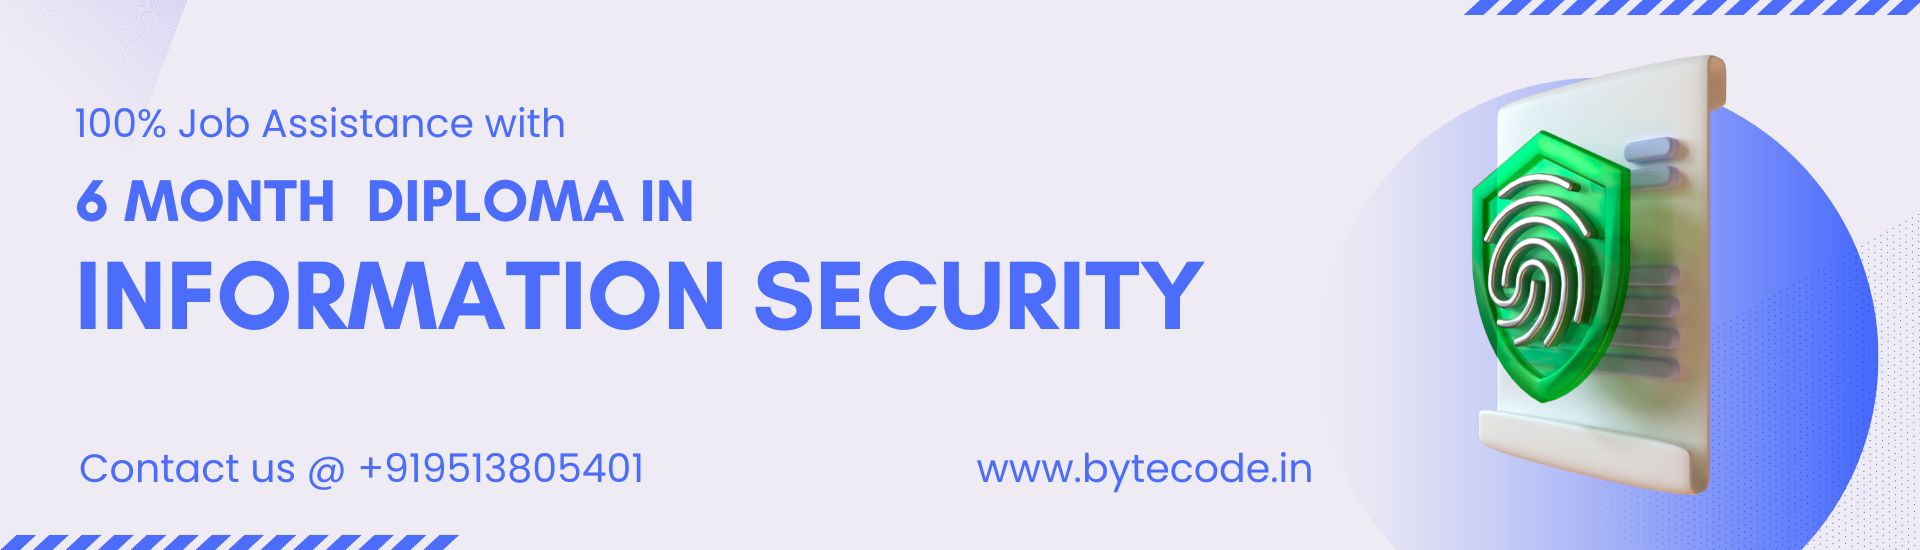  /></p>
<h2>About 6 Month Diploma Summer Internship Training</h2>
<p>In this COVID-19 situation, bytecode provides you a short-term “6 Month Diploma in Information Security Summer Internship “Course. You can learn from home we provide “Online Classes” as per your schedule timing because bytecode cybersecurity provides online training 24×7. So it is easier to get more knowledge from online classes at home. Students will get the live class video of their course after completion.</p>
<p>Summer Internship in Diploma in Information Security Specialization by Bytecode Cyber Security is a new 6-month diploma course with a 100% job guarantee. We have especially designed this course for students who want to excel in a career in cybersecurity. In this, we tend to cover the most industry demanded focussed areas considering international industry-oriented courses making an exclusive pack of one combo. The exposure to practical learning is very high. You will get a huge amount of time for practice using Live projects and real-time simulations to make you an expert in Cybersecurity. Cybersecurity has become one of the most required fields in IT and with this, the sector is booming with jobs. We have been in the industry for a long time and have experienced faculty who impart theoretical knowledge with practical hands-on experience. Our Expert diploma course in cybersecurity will give you a chance to make a great career in the field of cybersecurity.</p>
<p>we only deliver the best quality and knowledge base solutions with a very high standard to our students, clients, and partners because we believe that the high standards bring excellent output in long run and our standards are our strength, and we support these standards so that when we say “We are Professional in it” and we must really mean it.</p>
<p>We Provide Cyber Security Summer Internship Training to our students, Corporate clients, and partners because we believe that the high standards bring excellent output. We prepare our students how will they secure at our end from Malware and viruses. Our clients learn <a href=